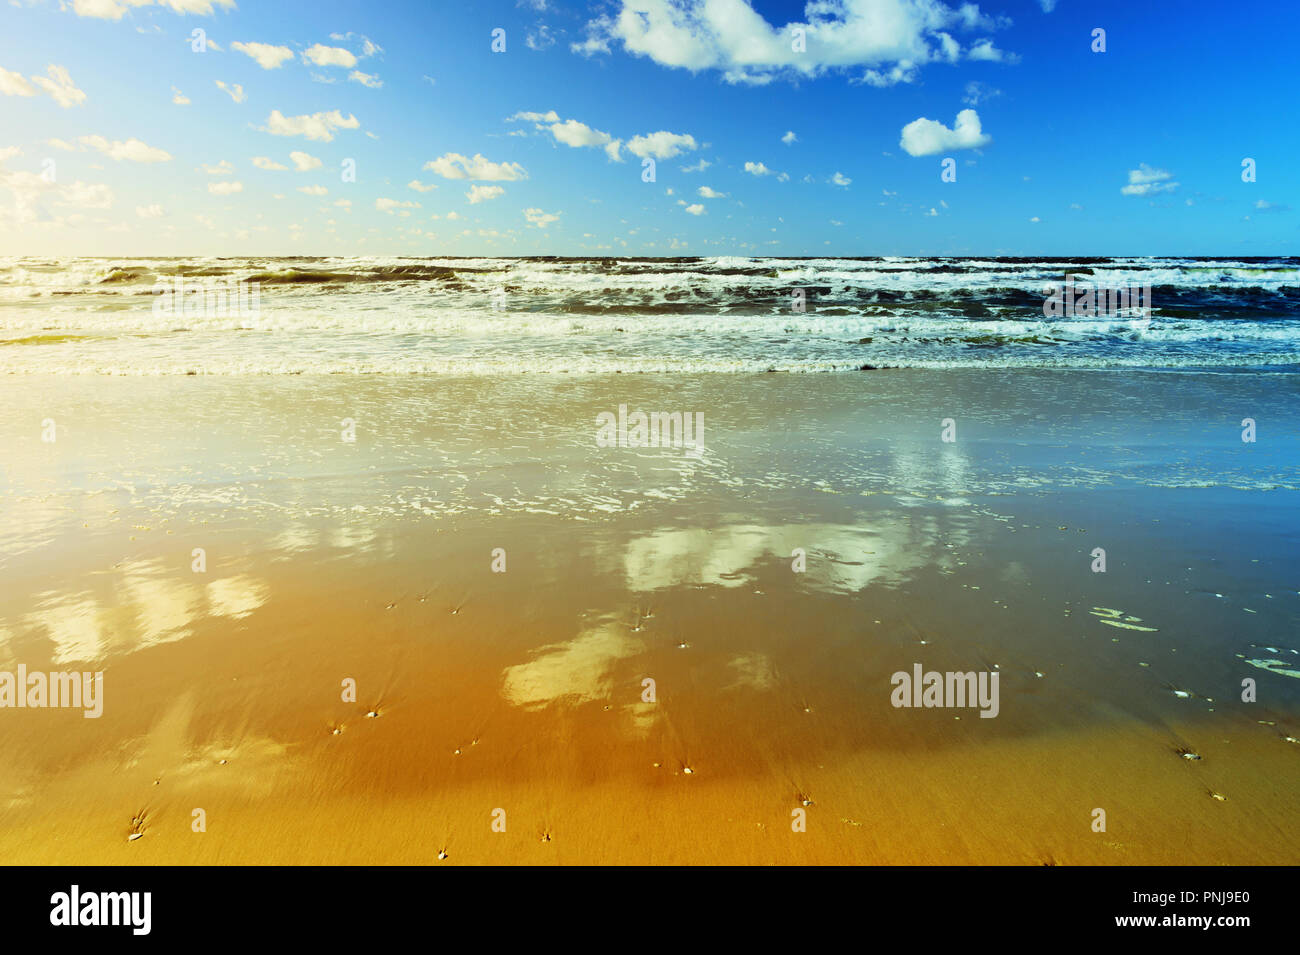 Beautiful seascape with sea waves, blue sky, white cumulus clouds and sandy beach. Summer vacation landscape. Baltic sea, Pomerania, northern Poland. Stock Photo